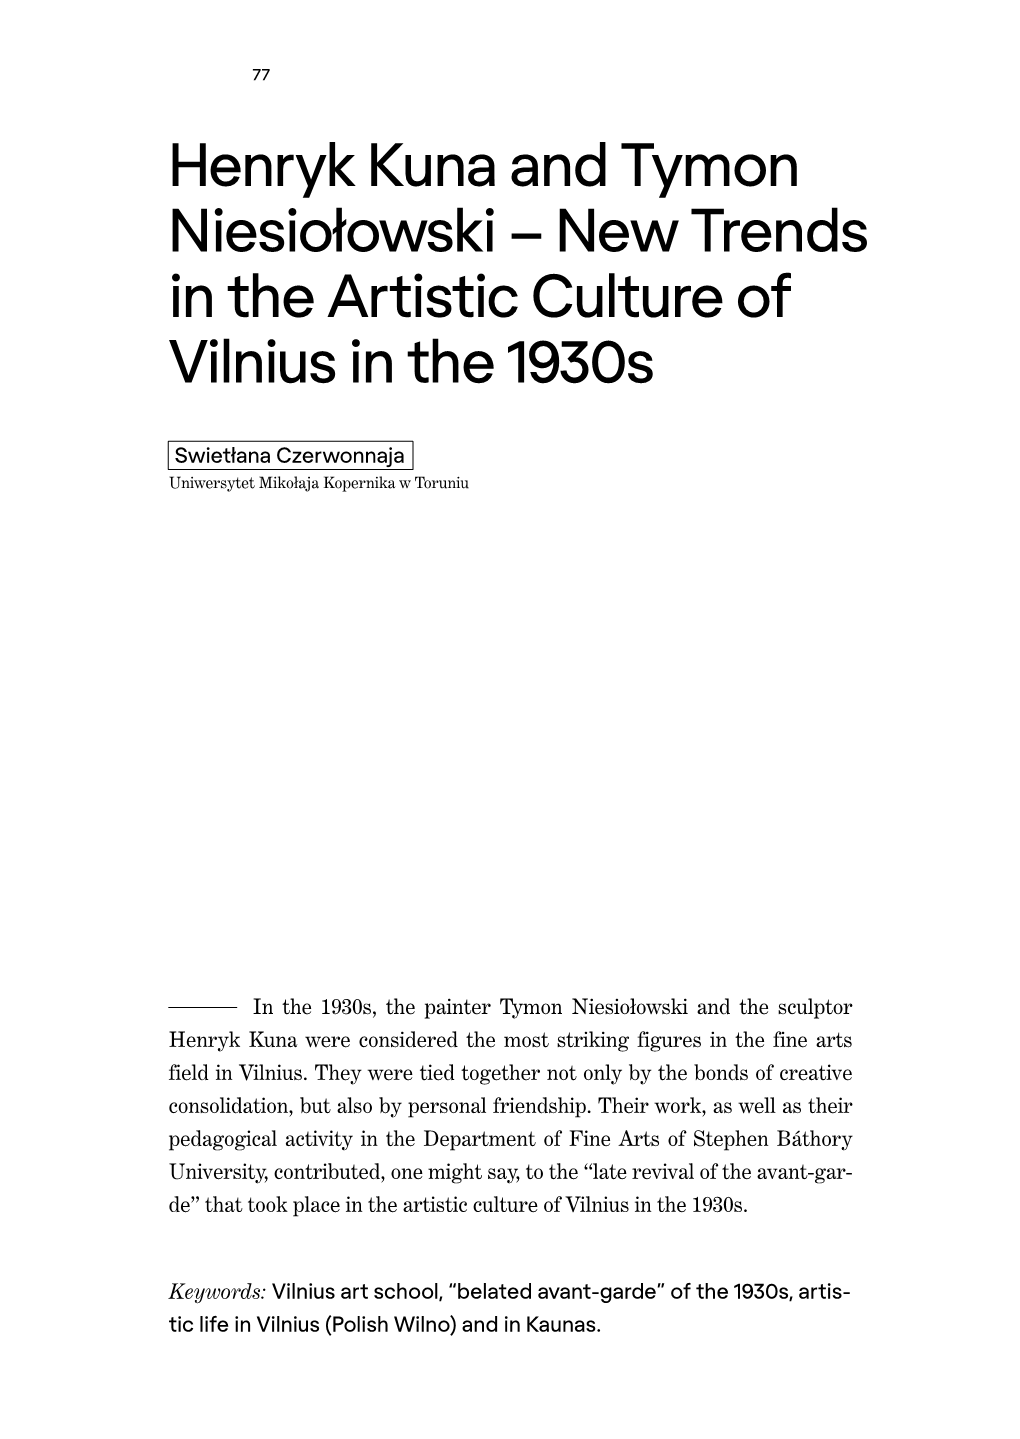 Henryk Kuna and Tymon Niesiołowski – New Trends in the Artistic Culture of Vilnius in the 1930S